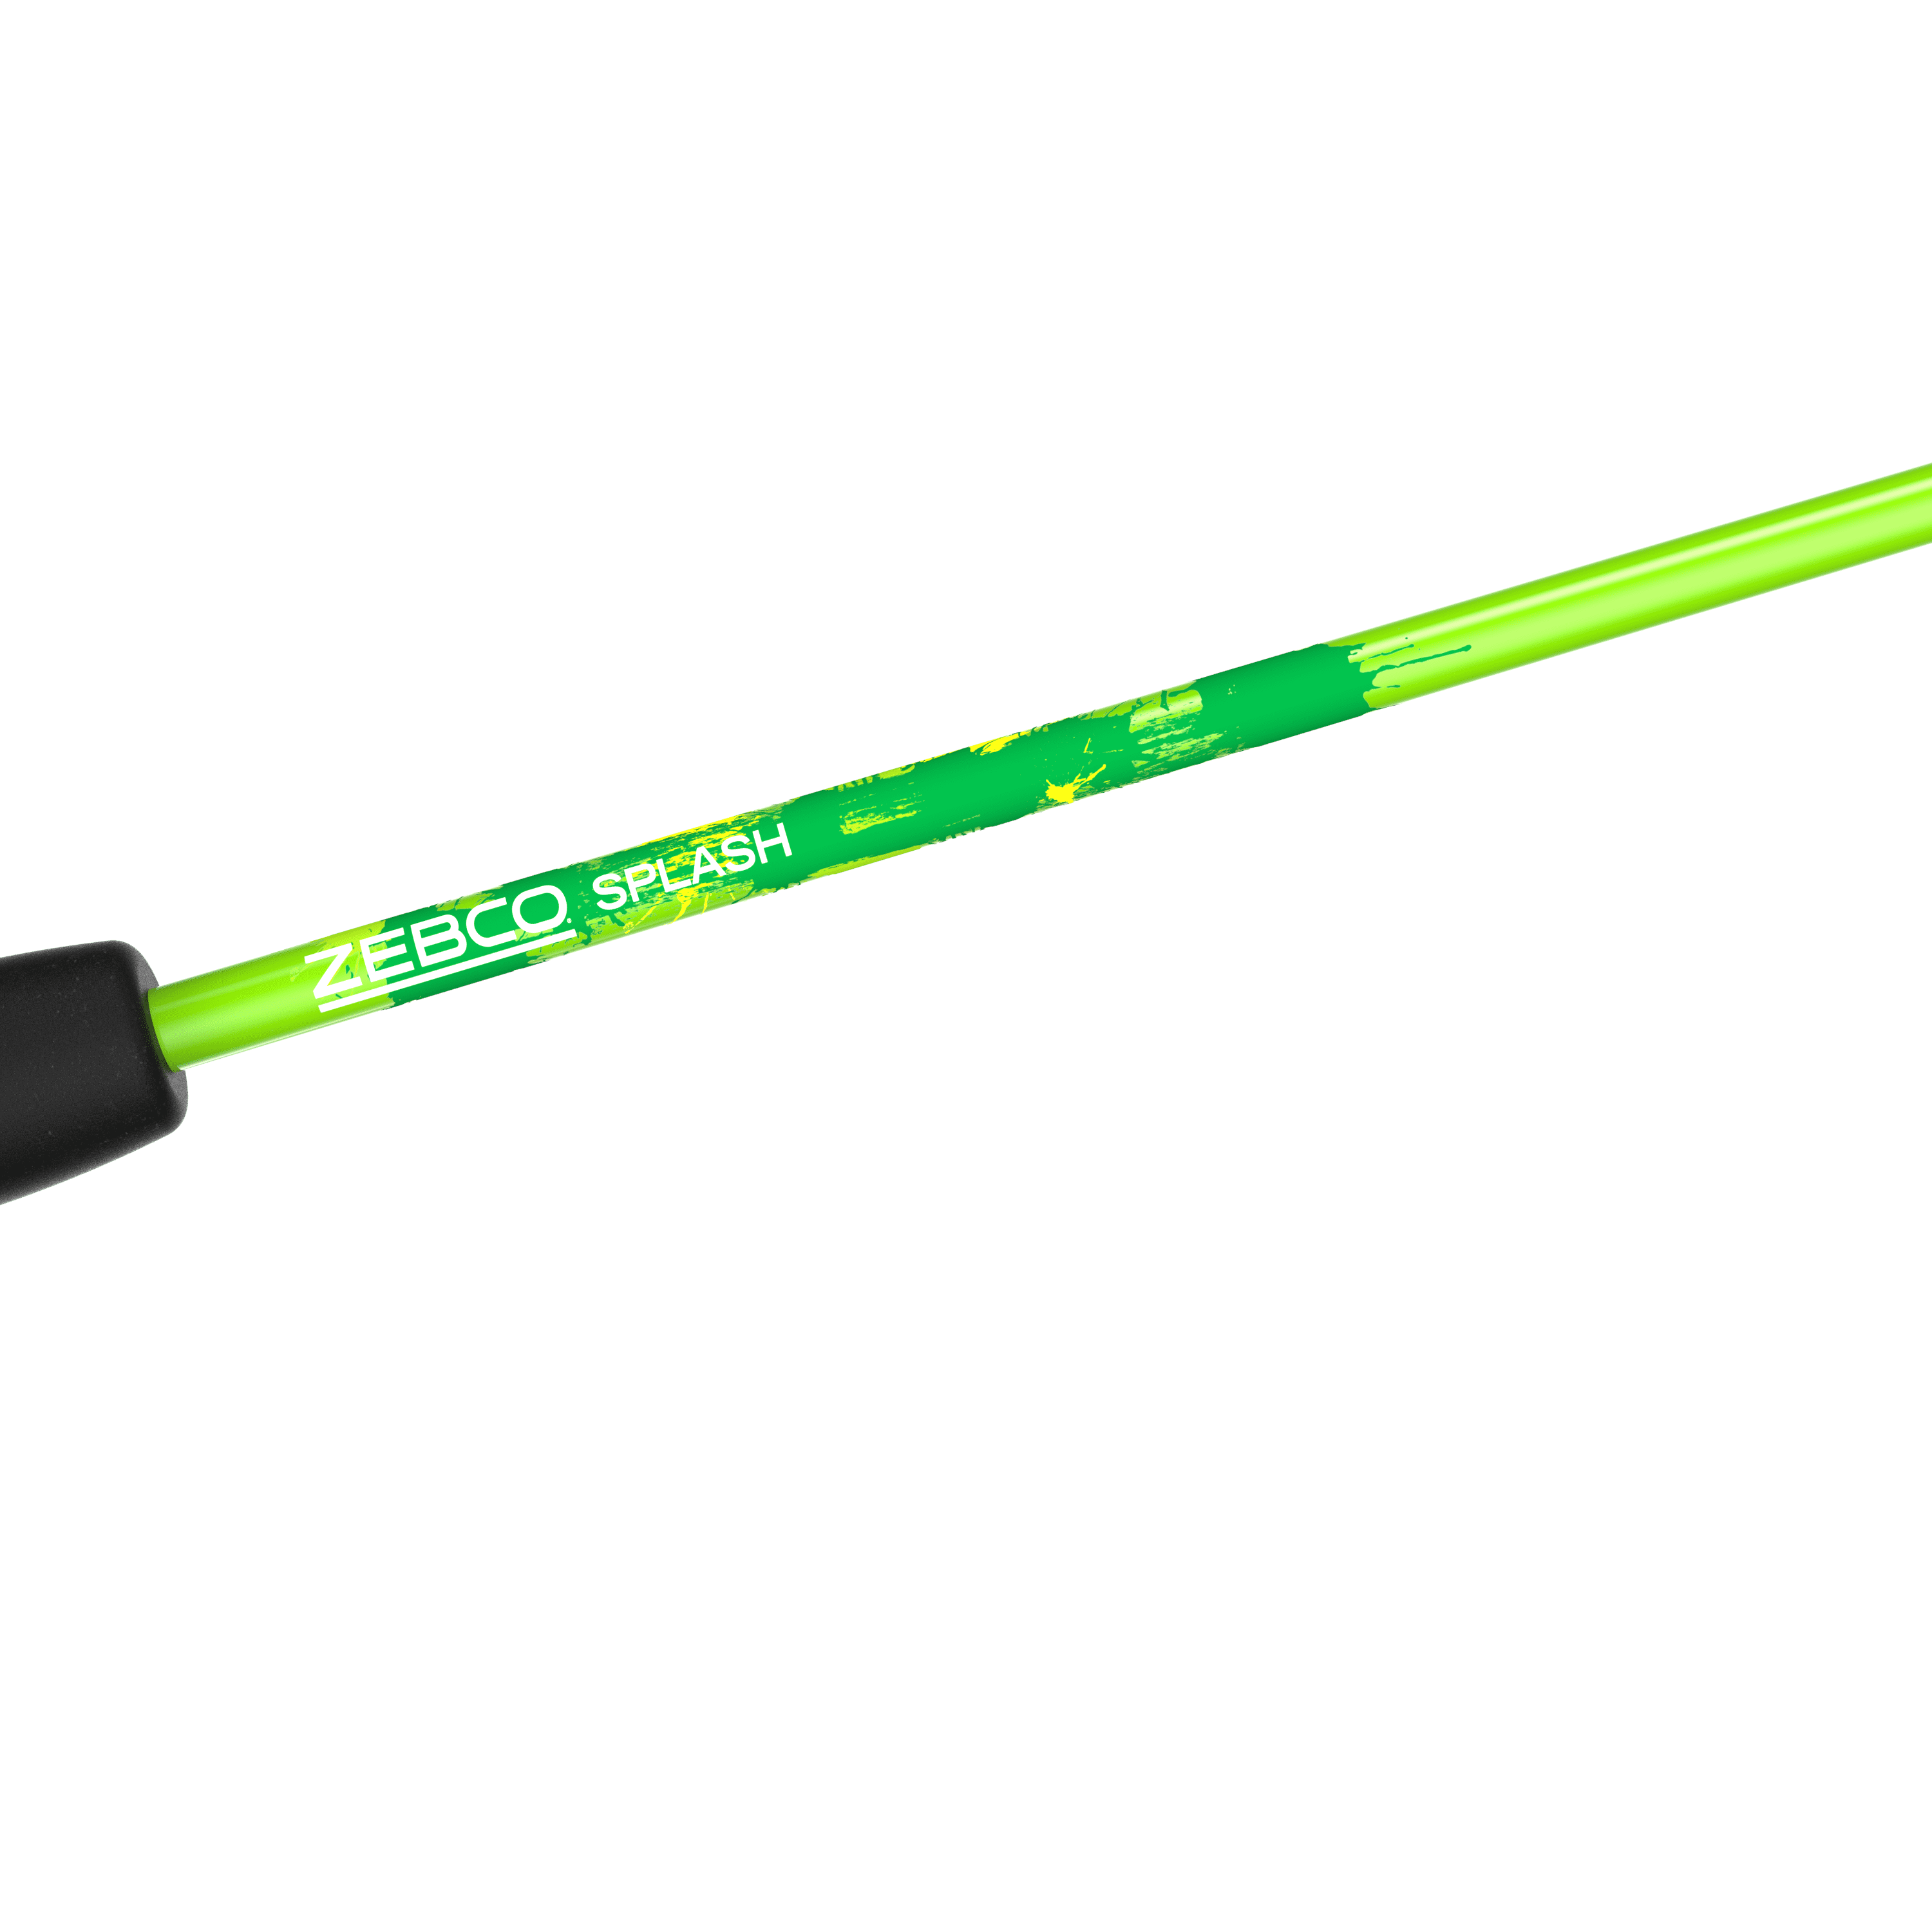 Zebco Splash Spincast Reel and Fishing Rod Combo, 6-Foot 2-Piece Fishing  Pole, Size 30 Reel, Changeable Right- or Left-Hand Retrieve, Pre-Spooled  with 10-Pound Zebco Line, Green 